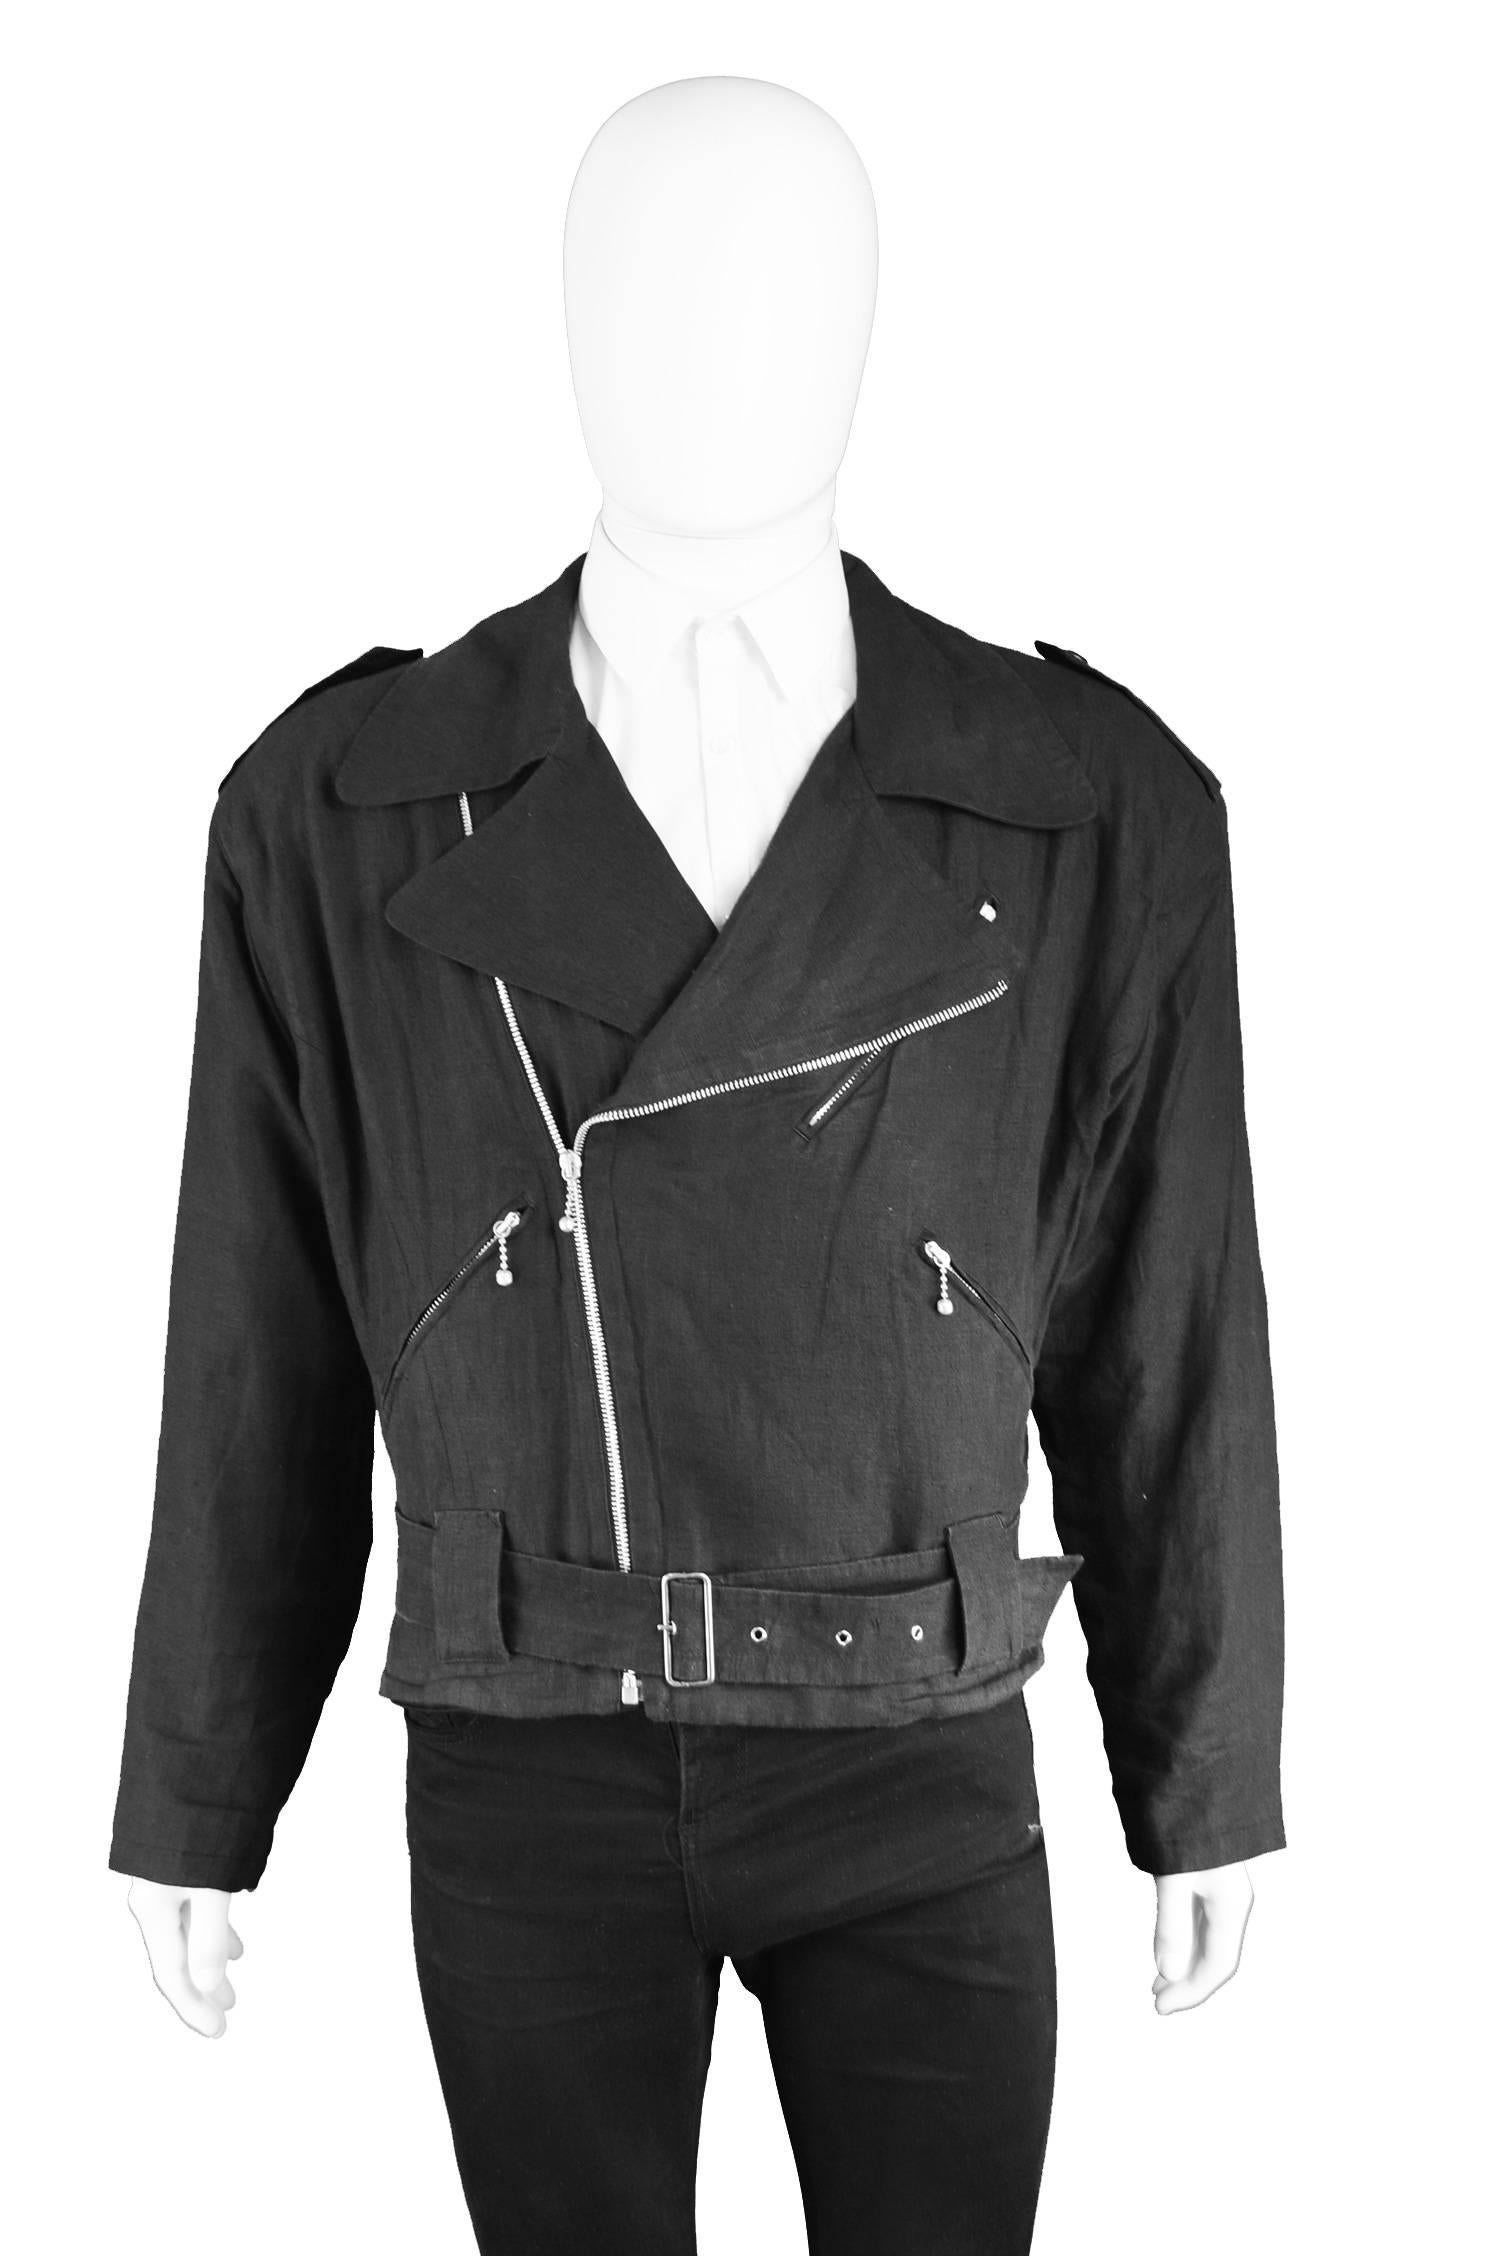 An incredible vintage mens biker style jacket from the 80s by legendary fashion designer, Jean Paul Gaultier for his rare collaboration with men's label Bogy's, similarly to Gibo and Equator he collaborated with Italian company Bogys until the late